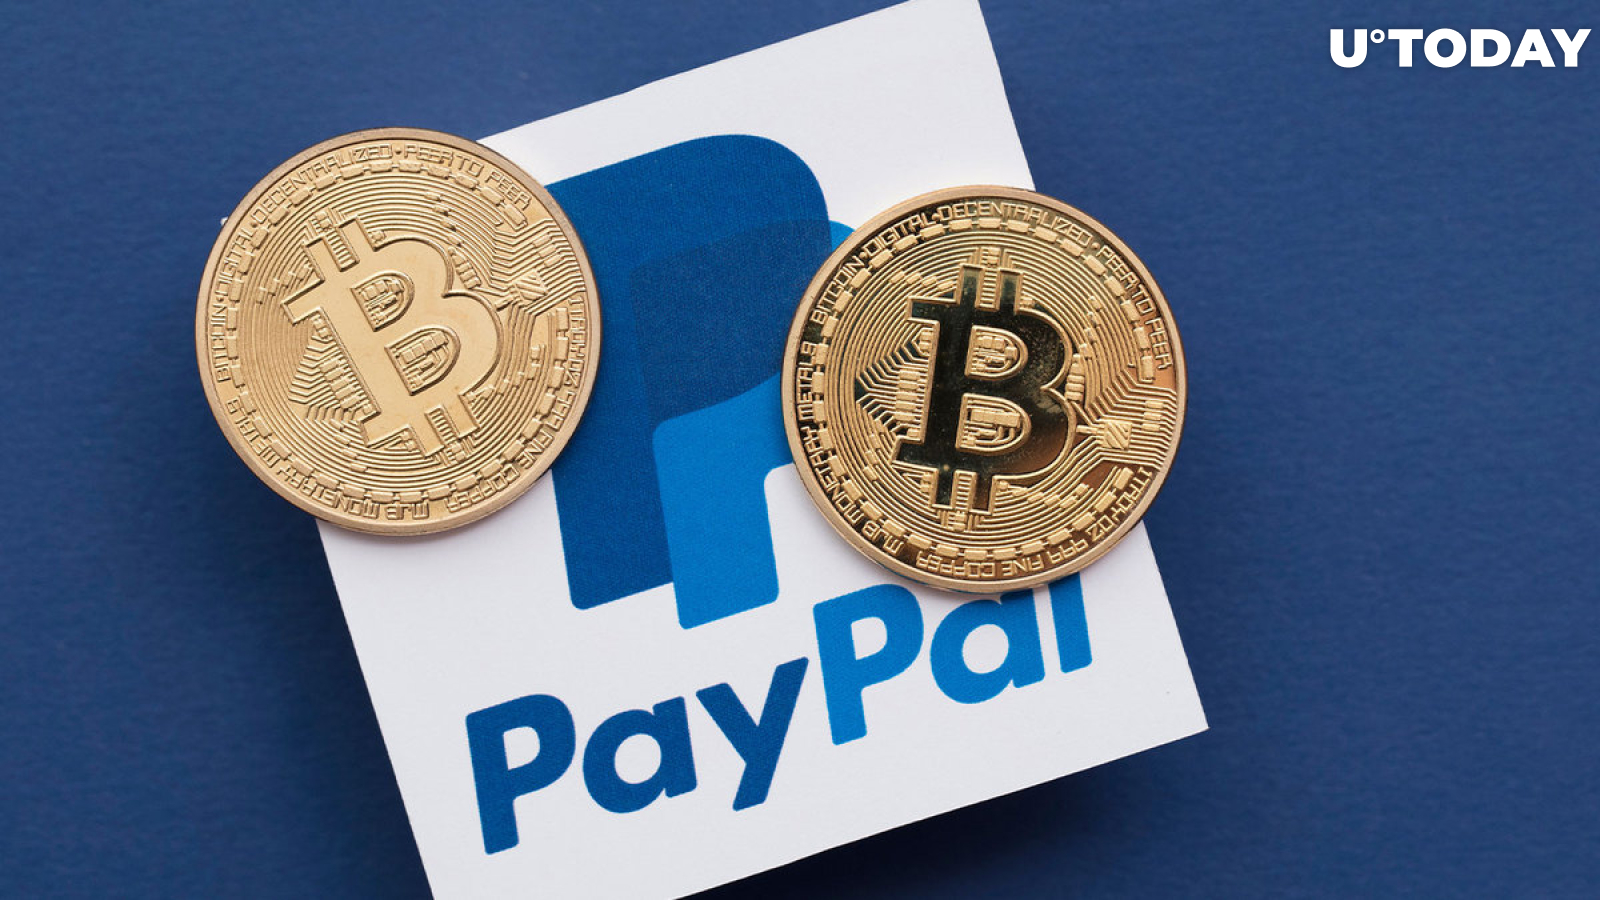 PayPal Offers Big Potential for Buying Bitcoin, John Lennon's Son Believes